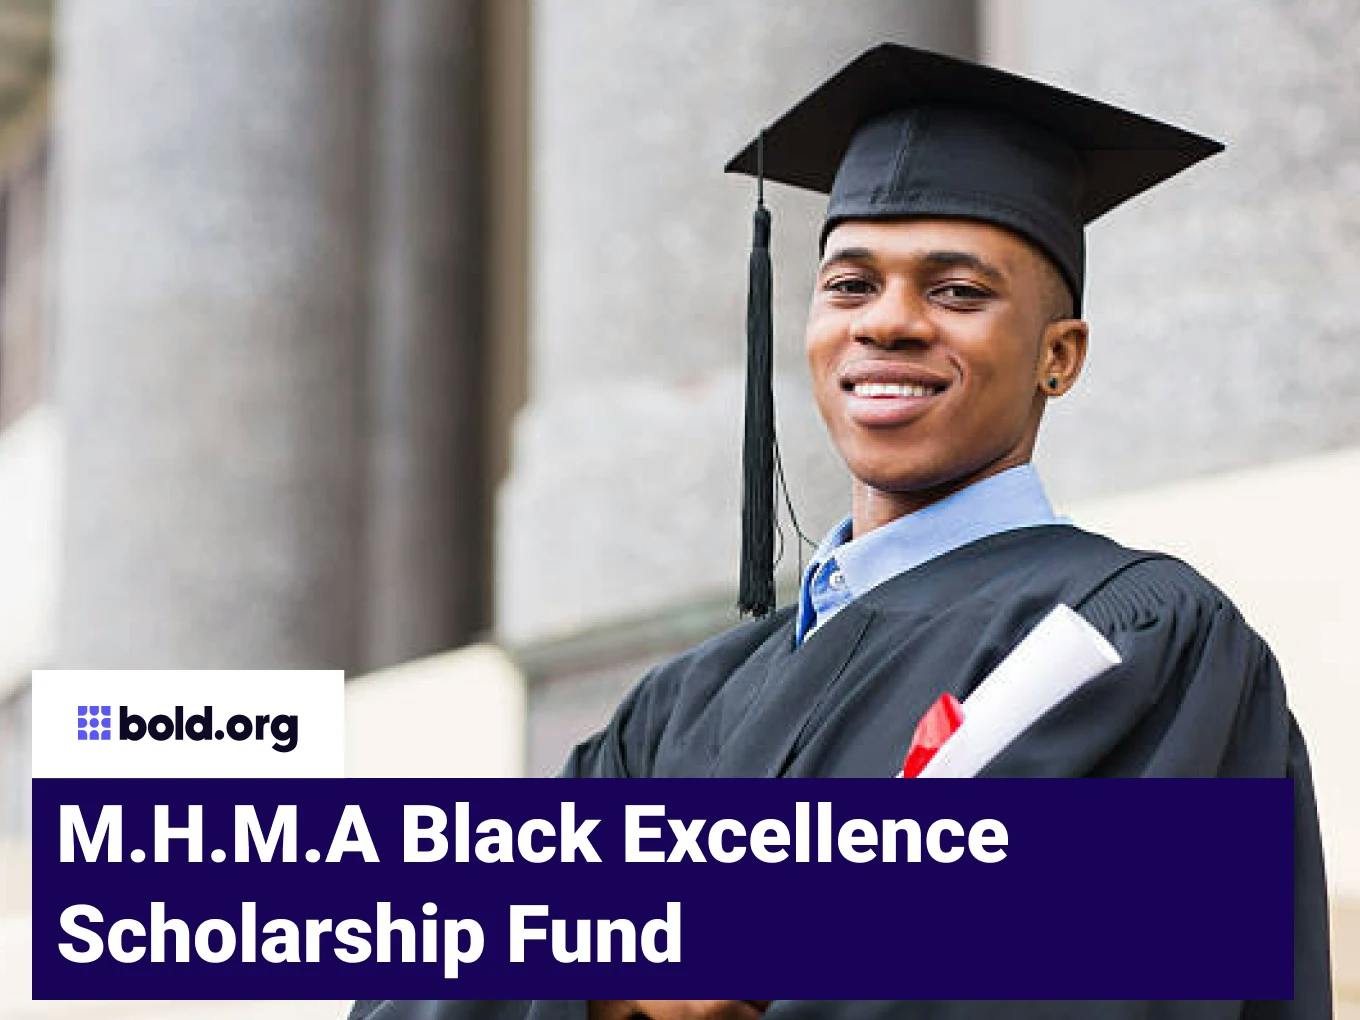 M.H.M.A Black Excellence Scholarship Fund